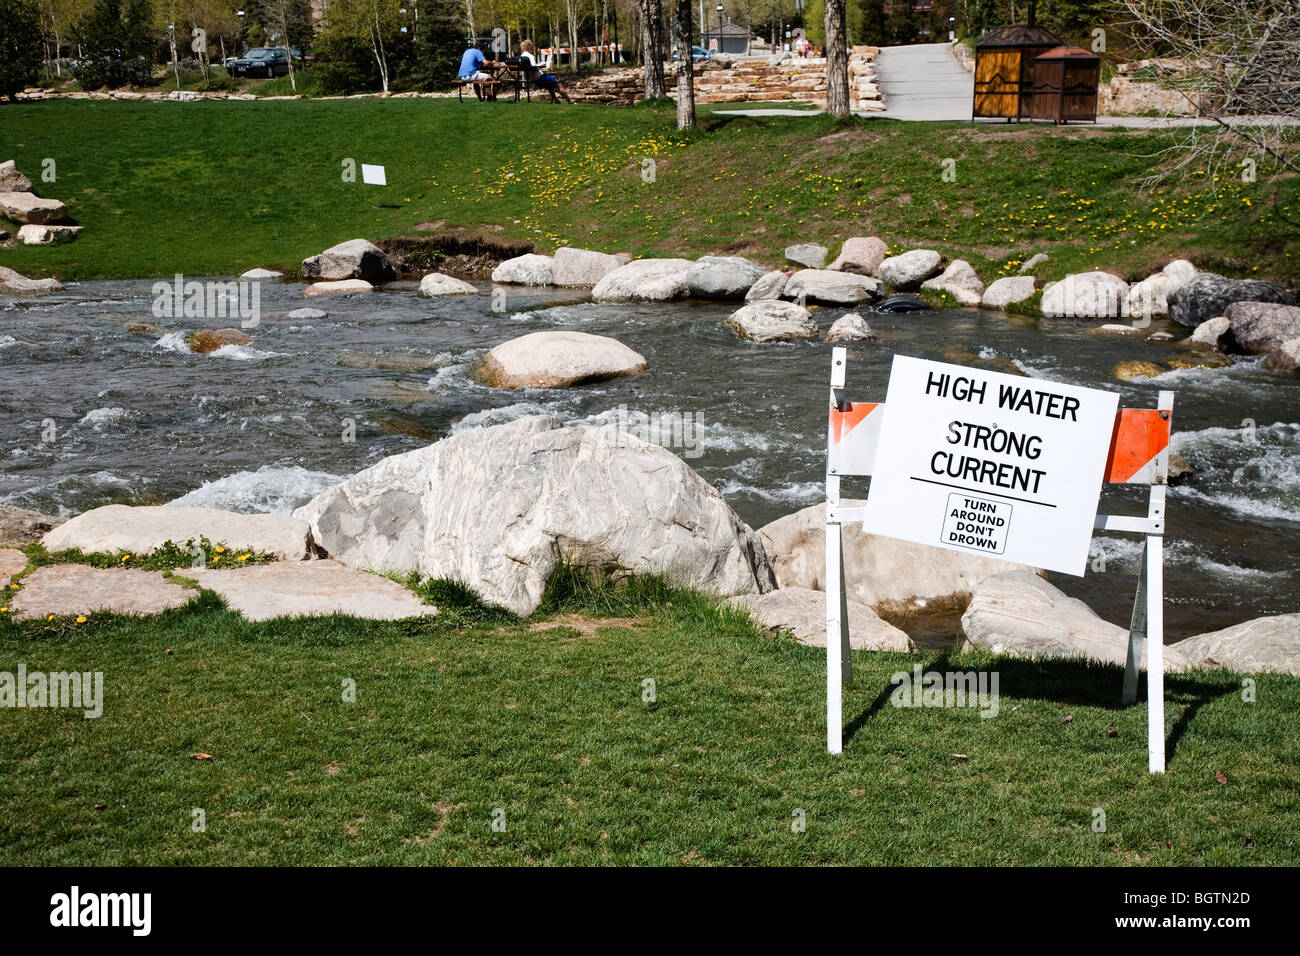 Warning notice about high water and strong current stating 'Turn around, don't drown' at Blue River, Breckenridge, Colorado USA Stock Photo